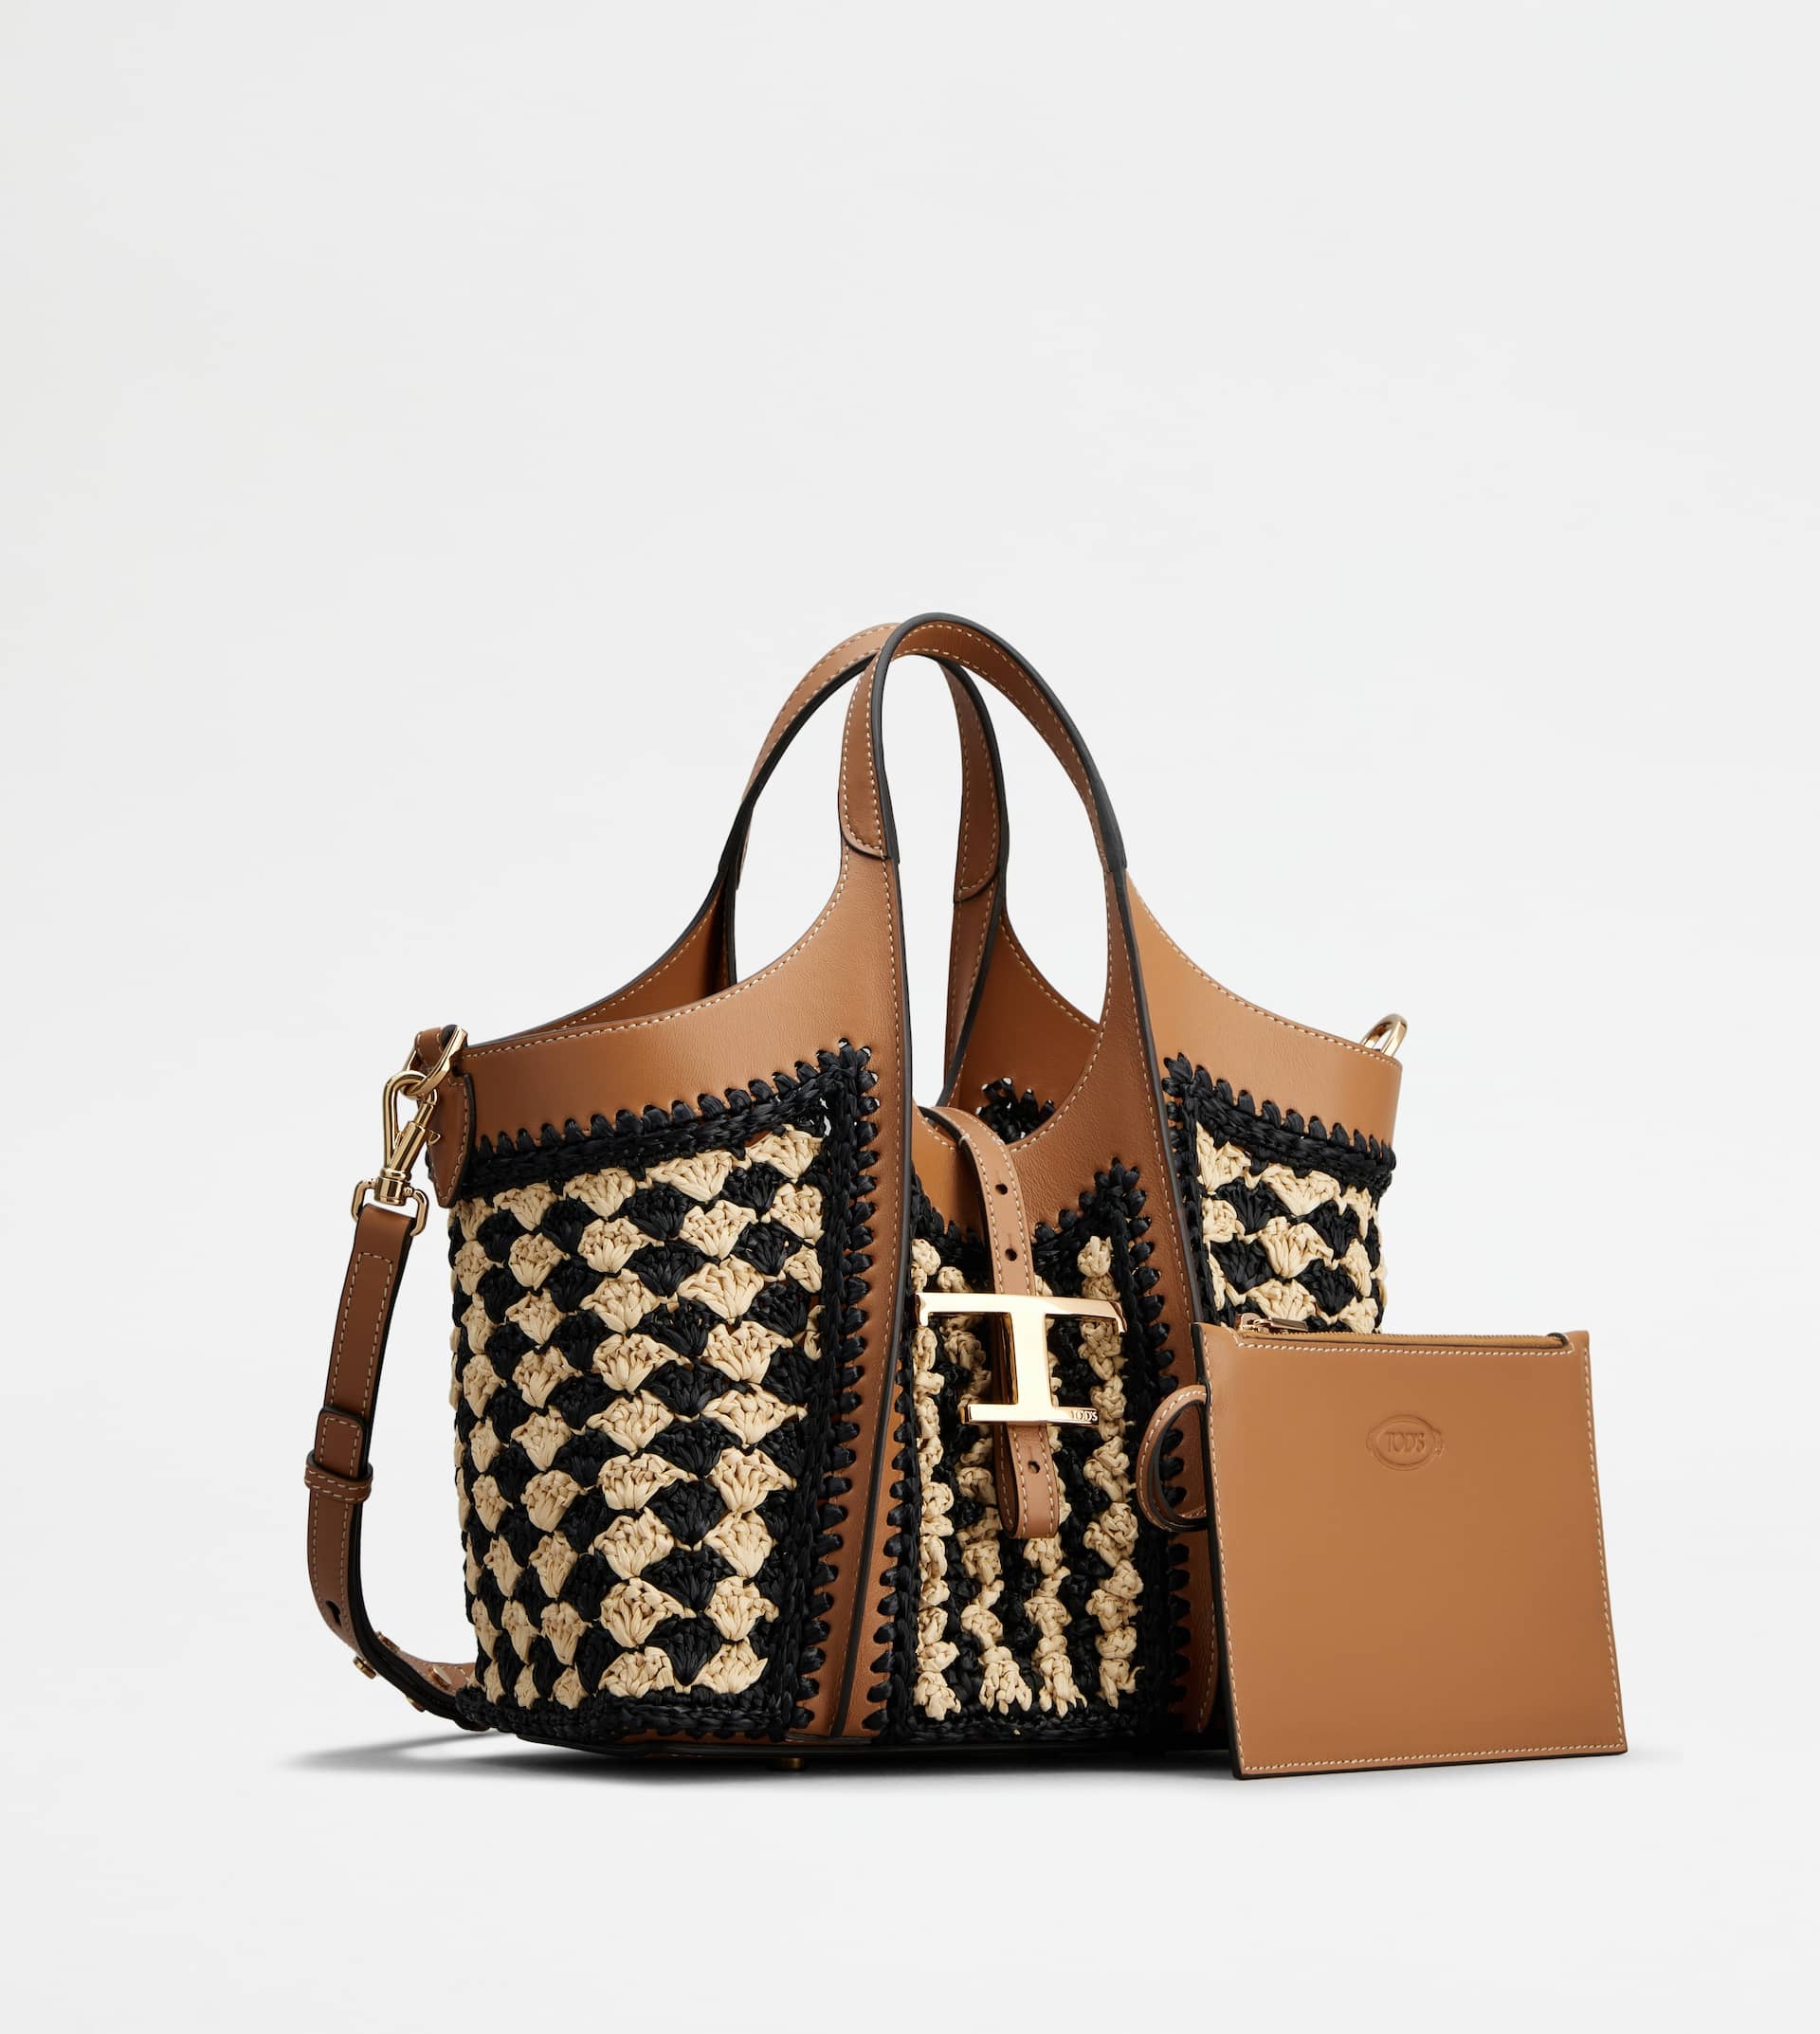 T TIMELESS SHOPPING BAG IN LEATHER AND RAFFIA MINI - BEIGE, BROWN, BLACK - 2